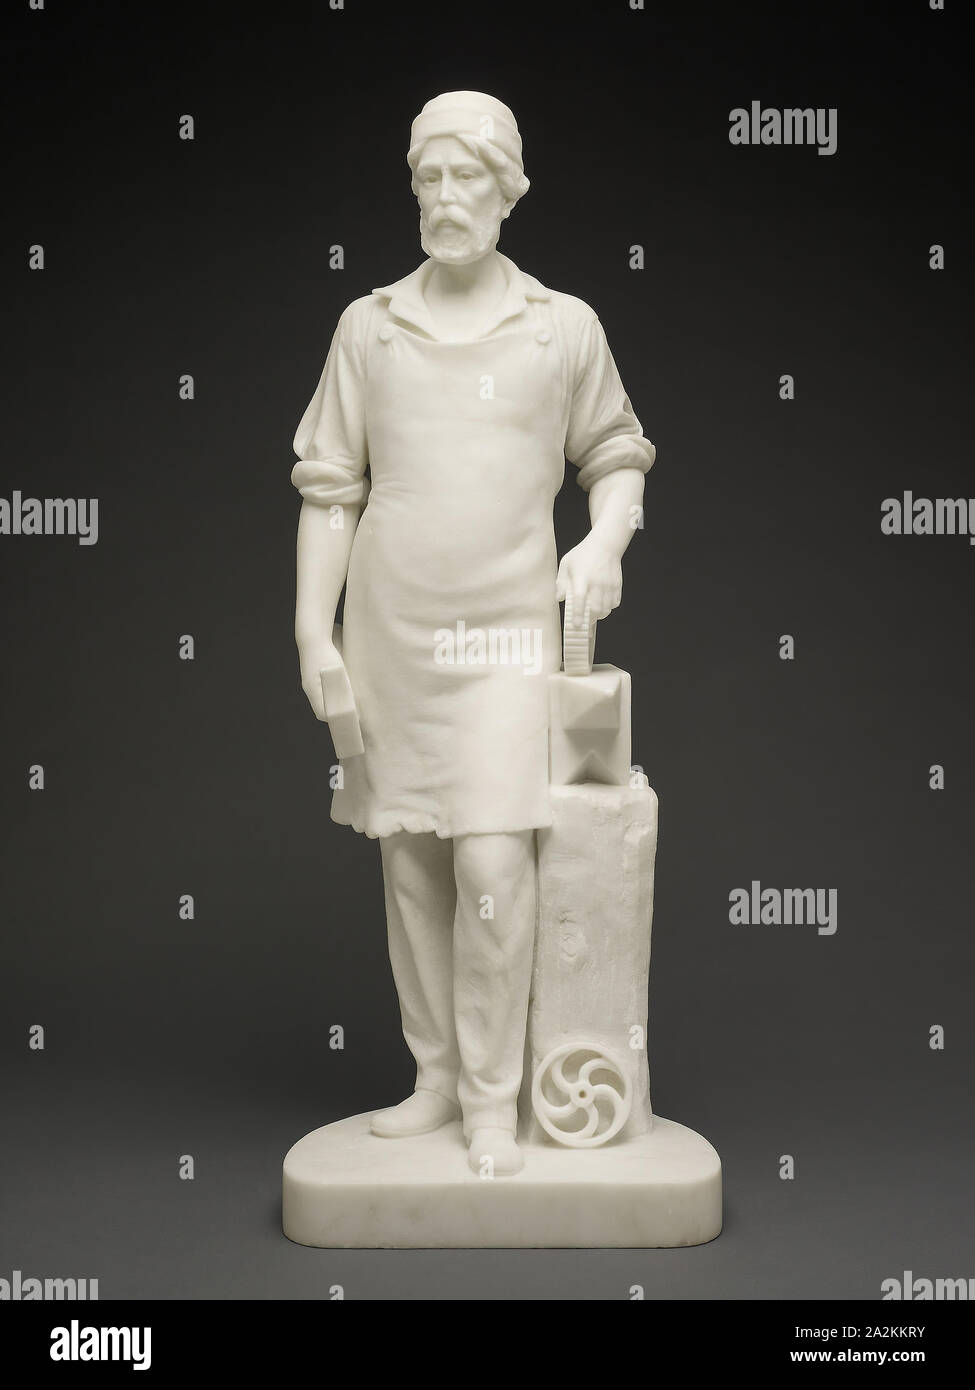 Machinist, c. 1859, Emma Stebbins, American, 1815–1882, United States, Marble, 74.9 × 29.2 × 29.2 cm (29 1/2 × 11 1/2 × 11 1/2 in Stock Photo